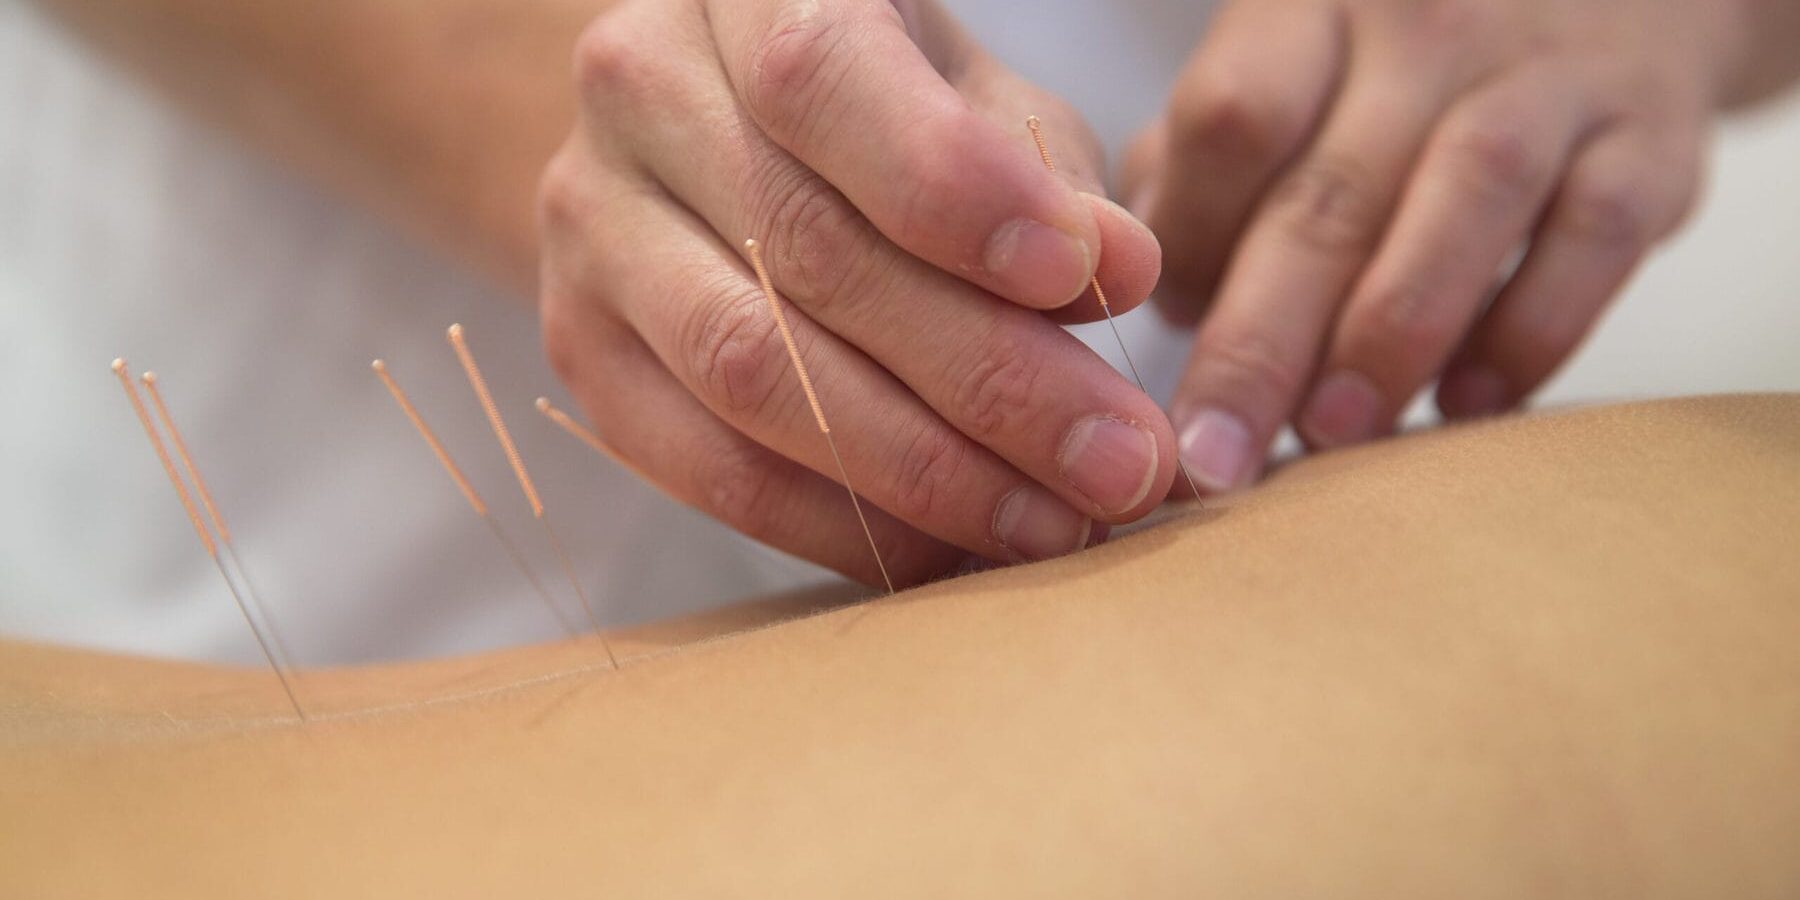 Acupuncture needles on back of a young woman